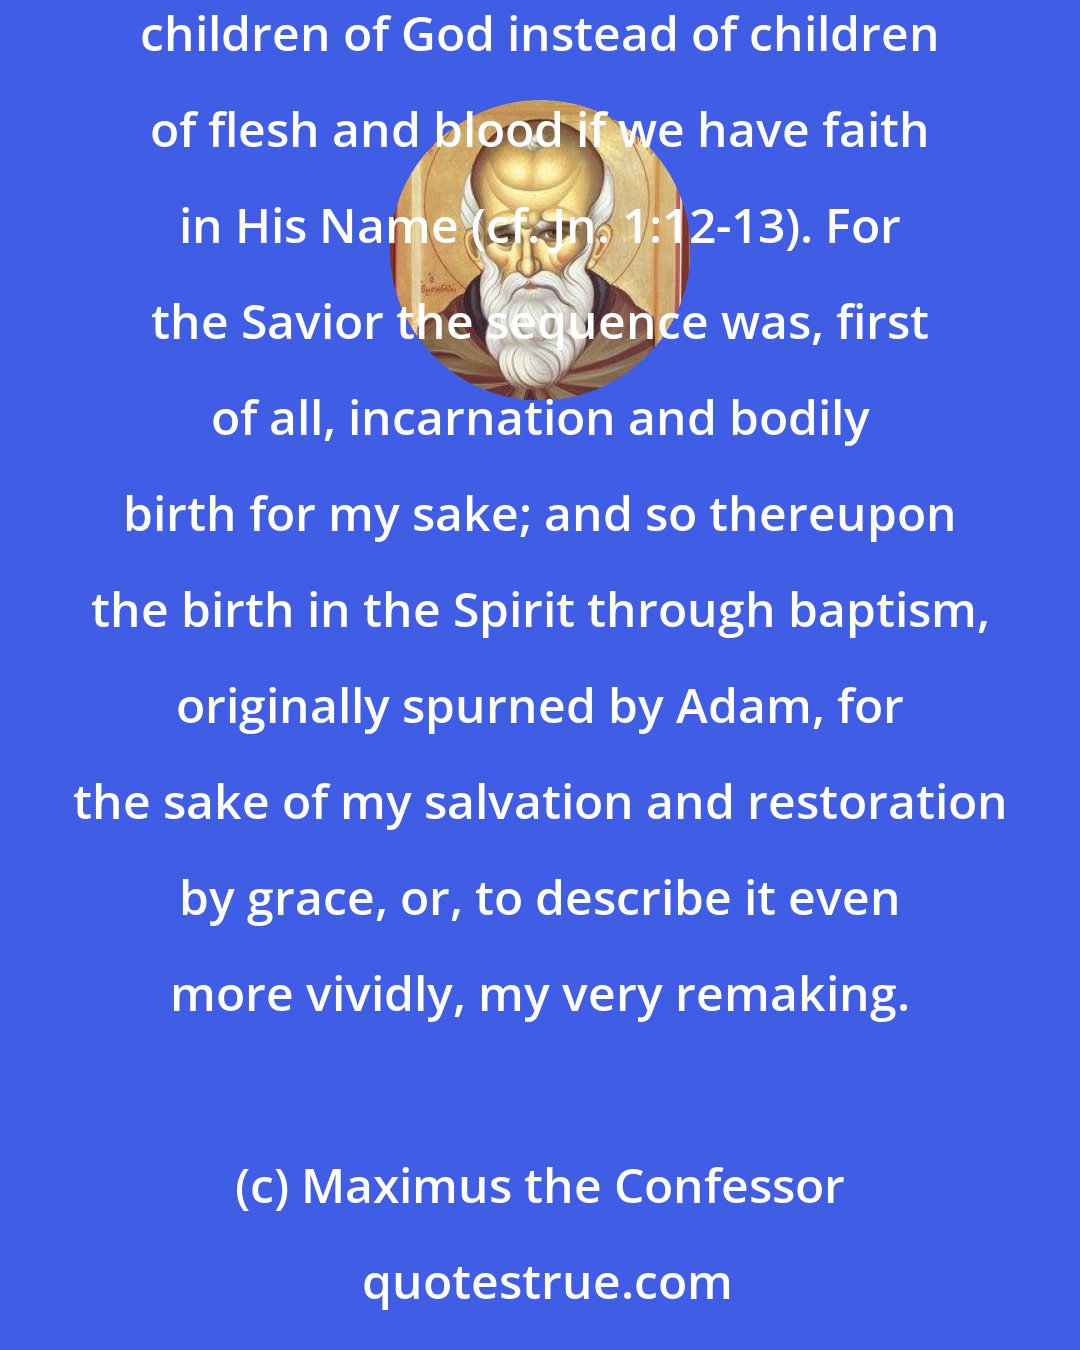 Maximus the Confessor: ... for our sake loosing within Himself the bonds of bodily birth, He granted us through spiritual birth, according to our own volition, power to become children of God instead of children of flesh and blood if we have faith in His Name (cf. Jn. 1:12-13). For the Savior the sequence was, first of all, incarnation and bodily birth for my sake; and so thereupon the birth in the Spirit through baptism, originally spurned by Adam, for the sake of my salvation and restoration by grace, or, to describe it even more vividly, my very remaking.